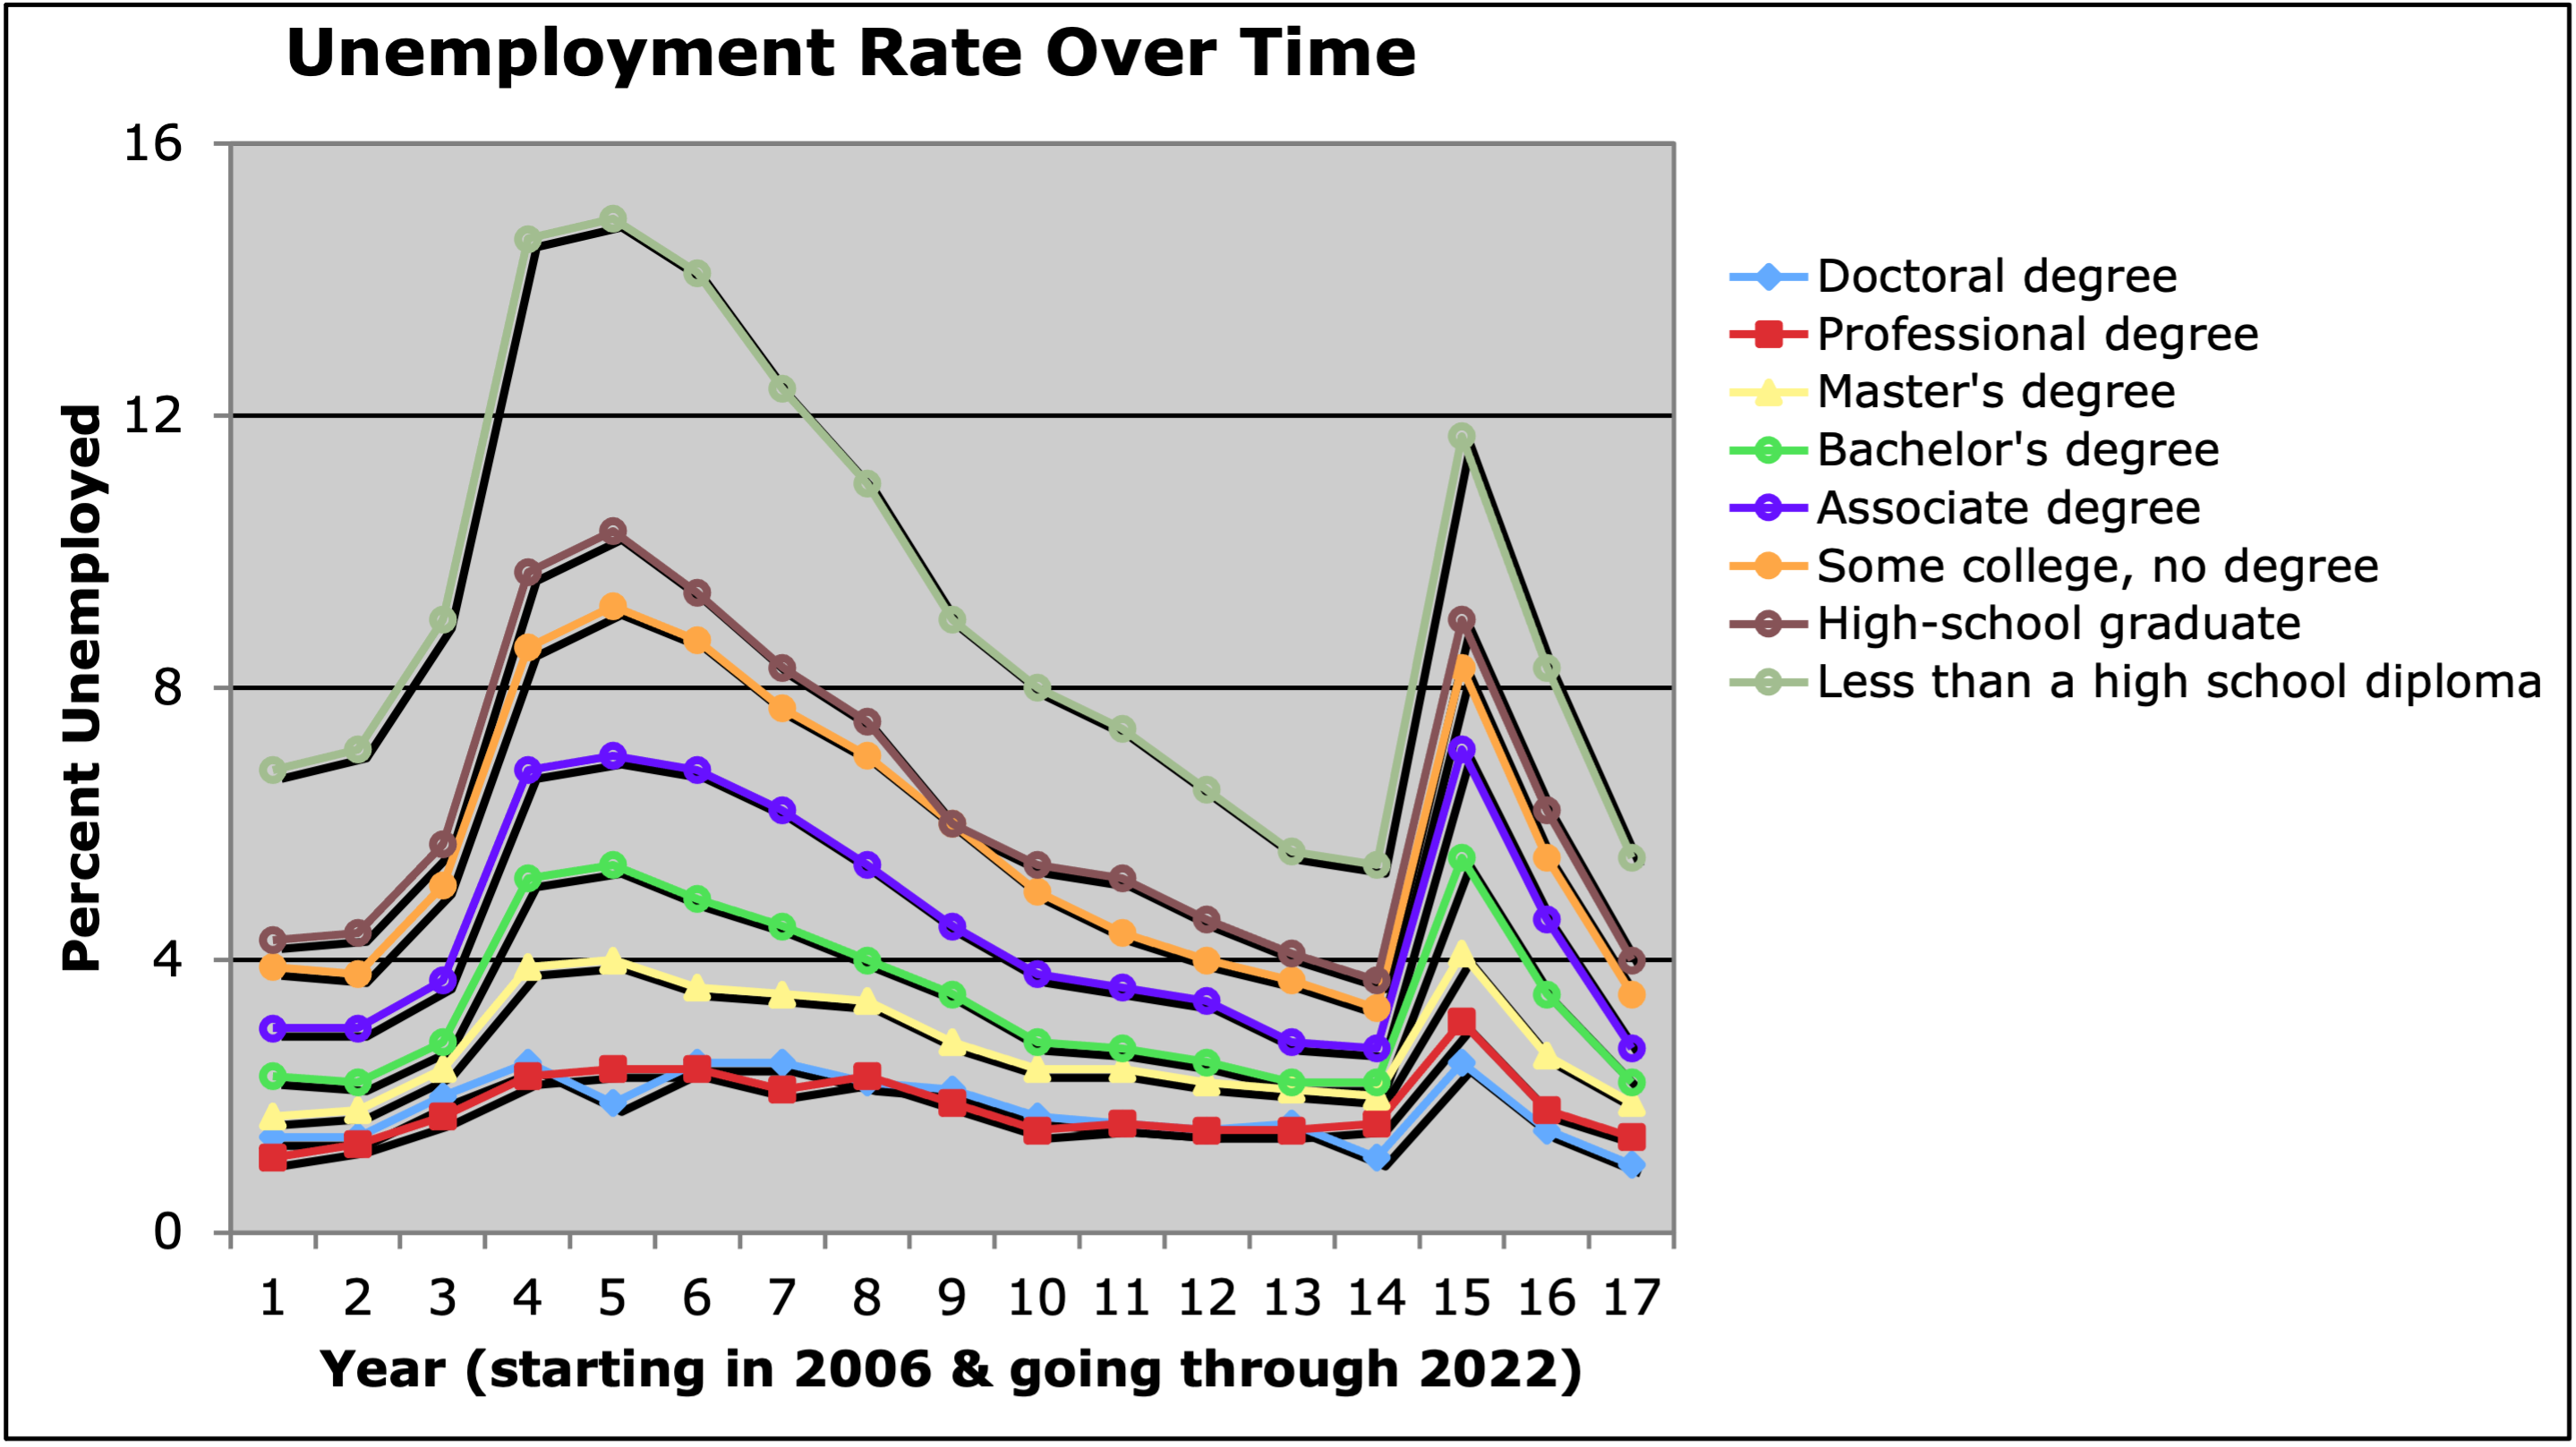 Unemployment rate over time